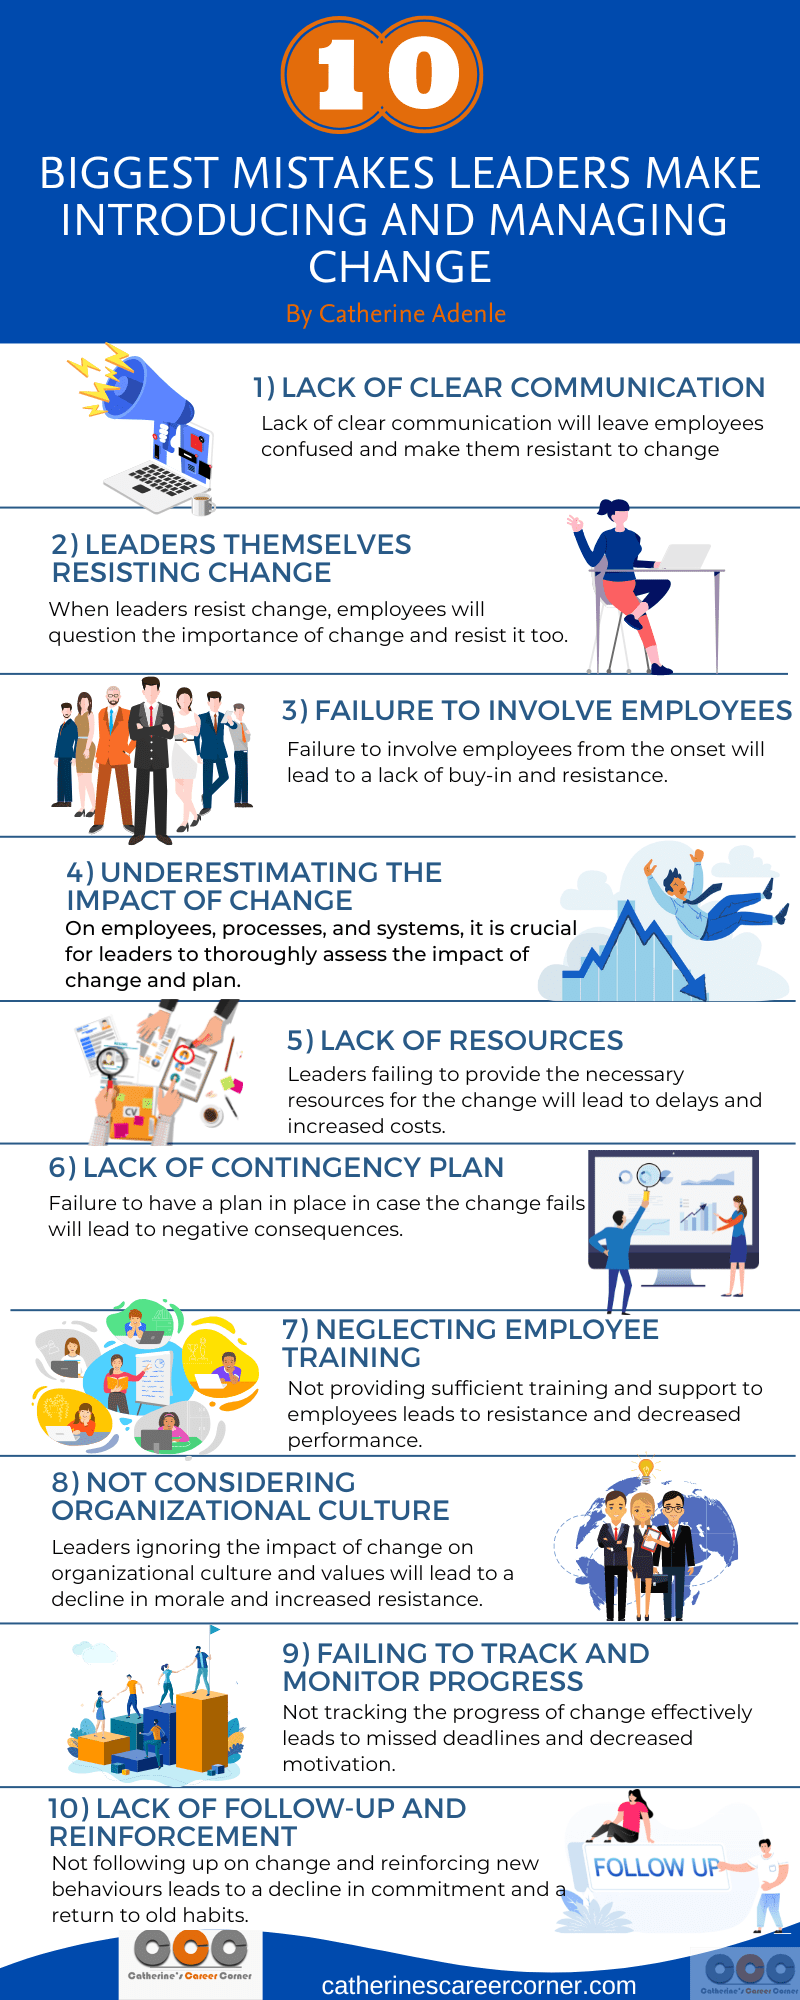 Infographic: The 10 Mistakes Leaders Make When Introducing and Managing Change by Catherine Adenle